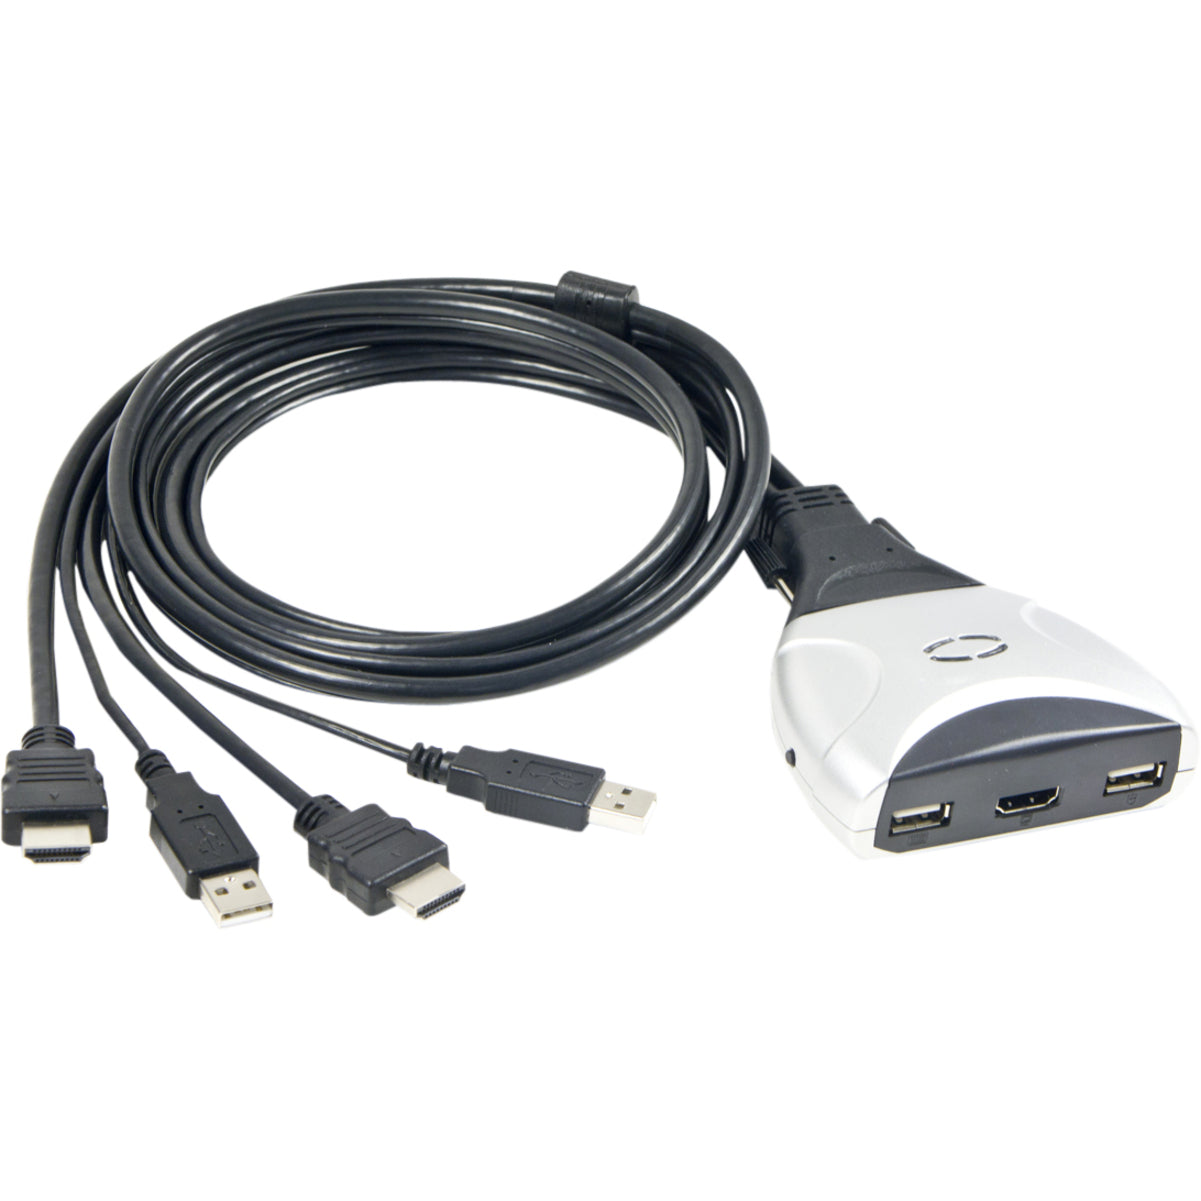 SYBA Multimedia SY-KVM31034 2 Port HDMI and USB 2.0 KVM Switch, Easy Computer Control and Switching